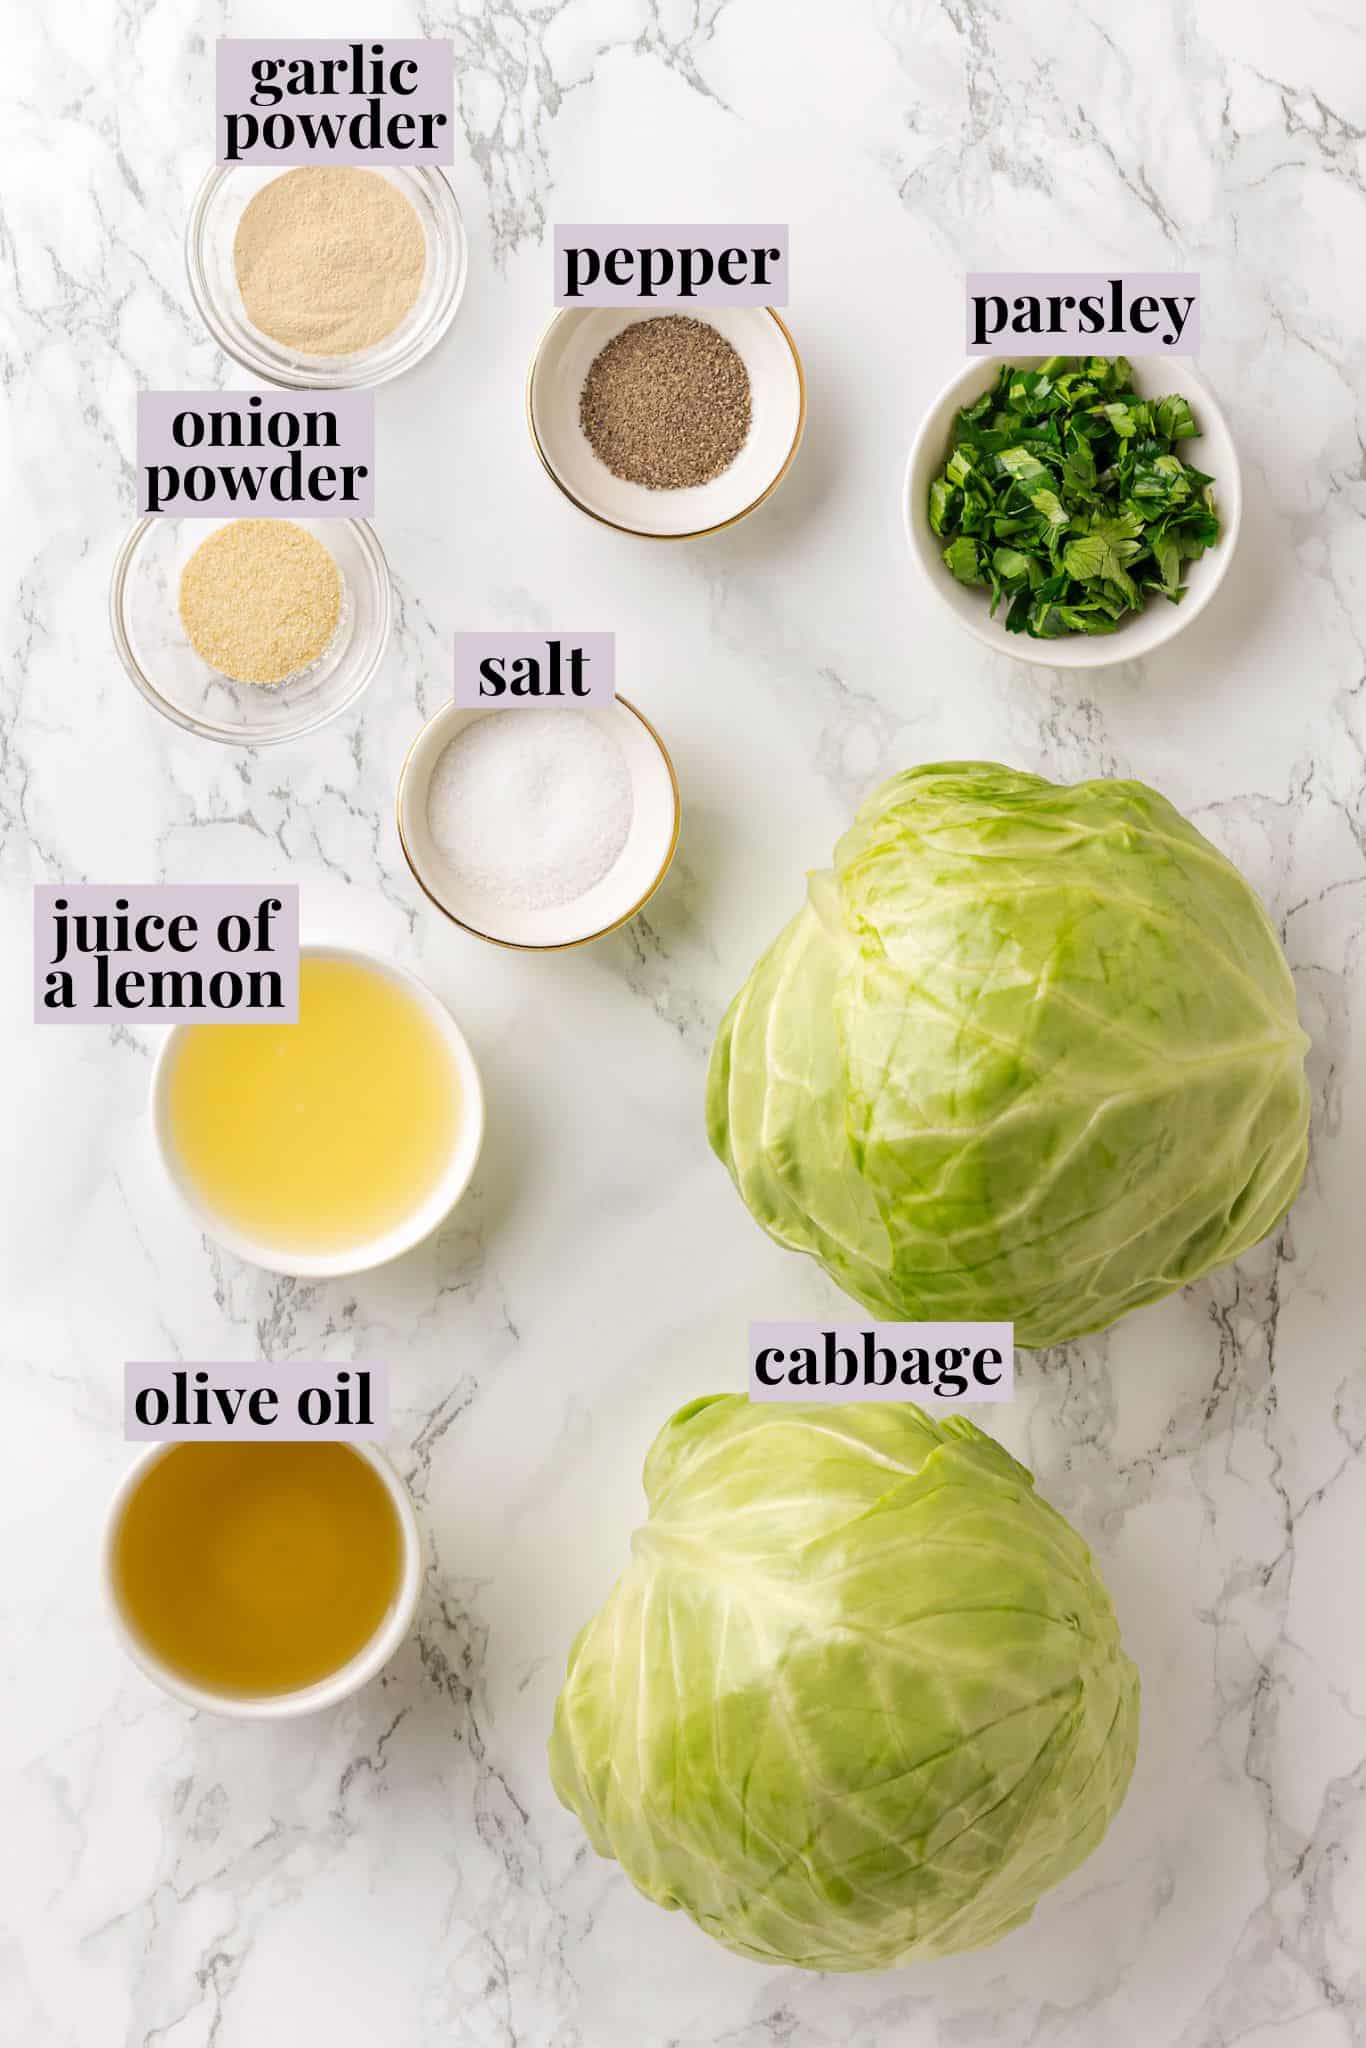 Overhead view of ingredients for cabbage steaks